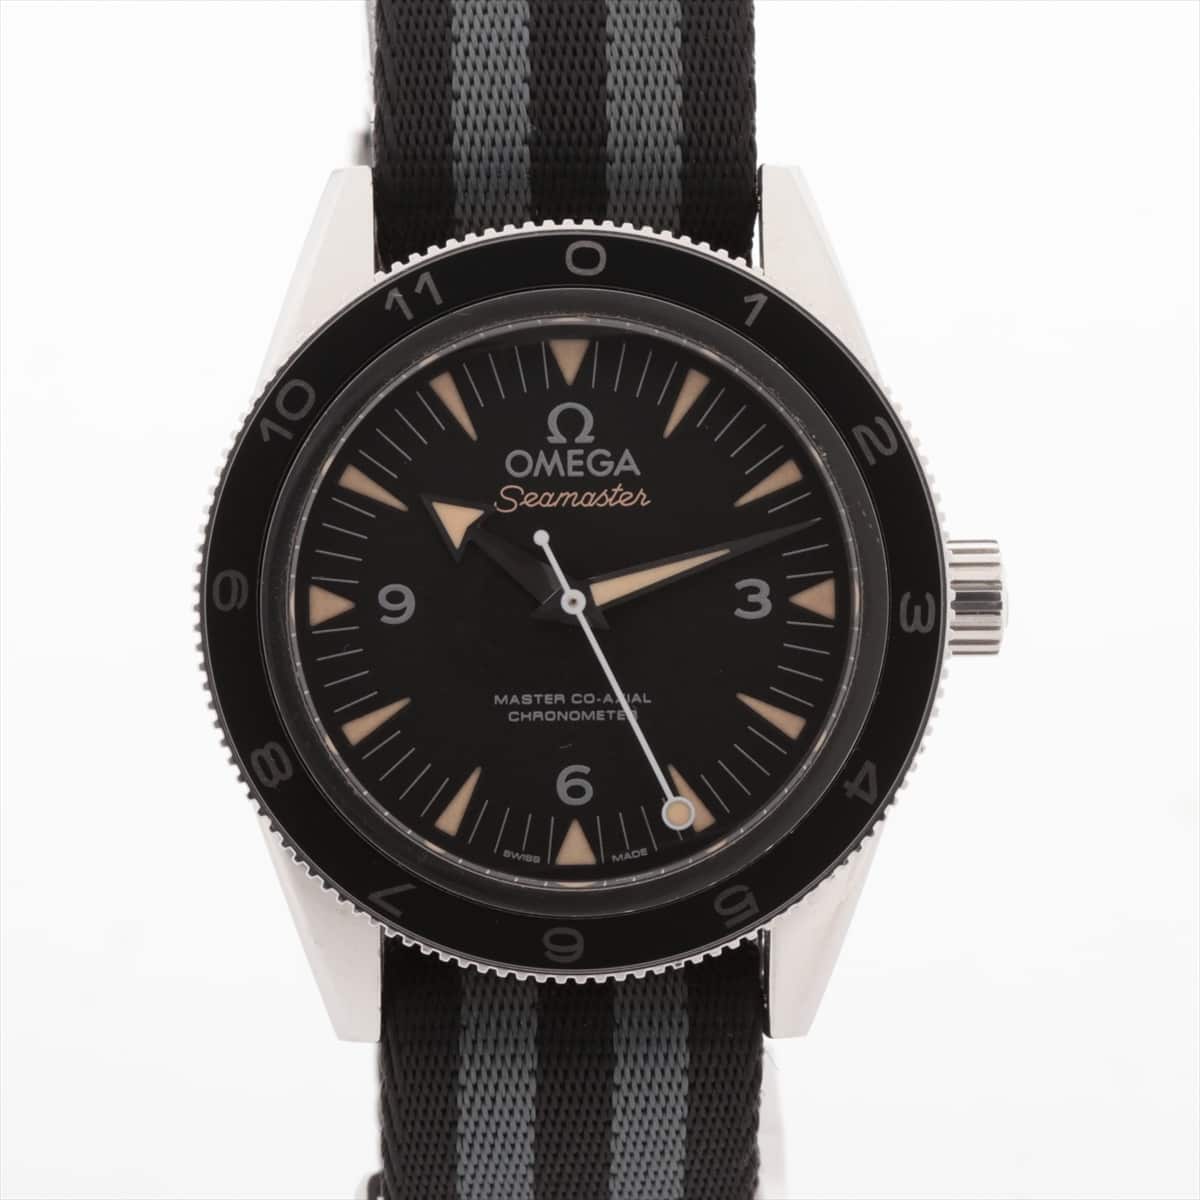 Omega Seamaster 300 Specter limited edition 233.32.41.21.01.001 SS & Nylon AT Black-Face Extra-Link3